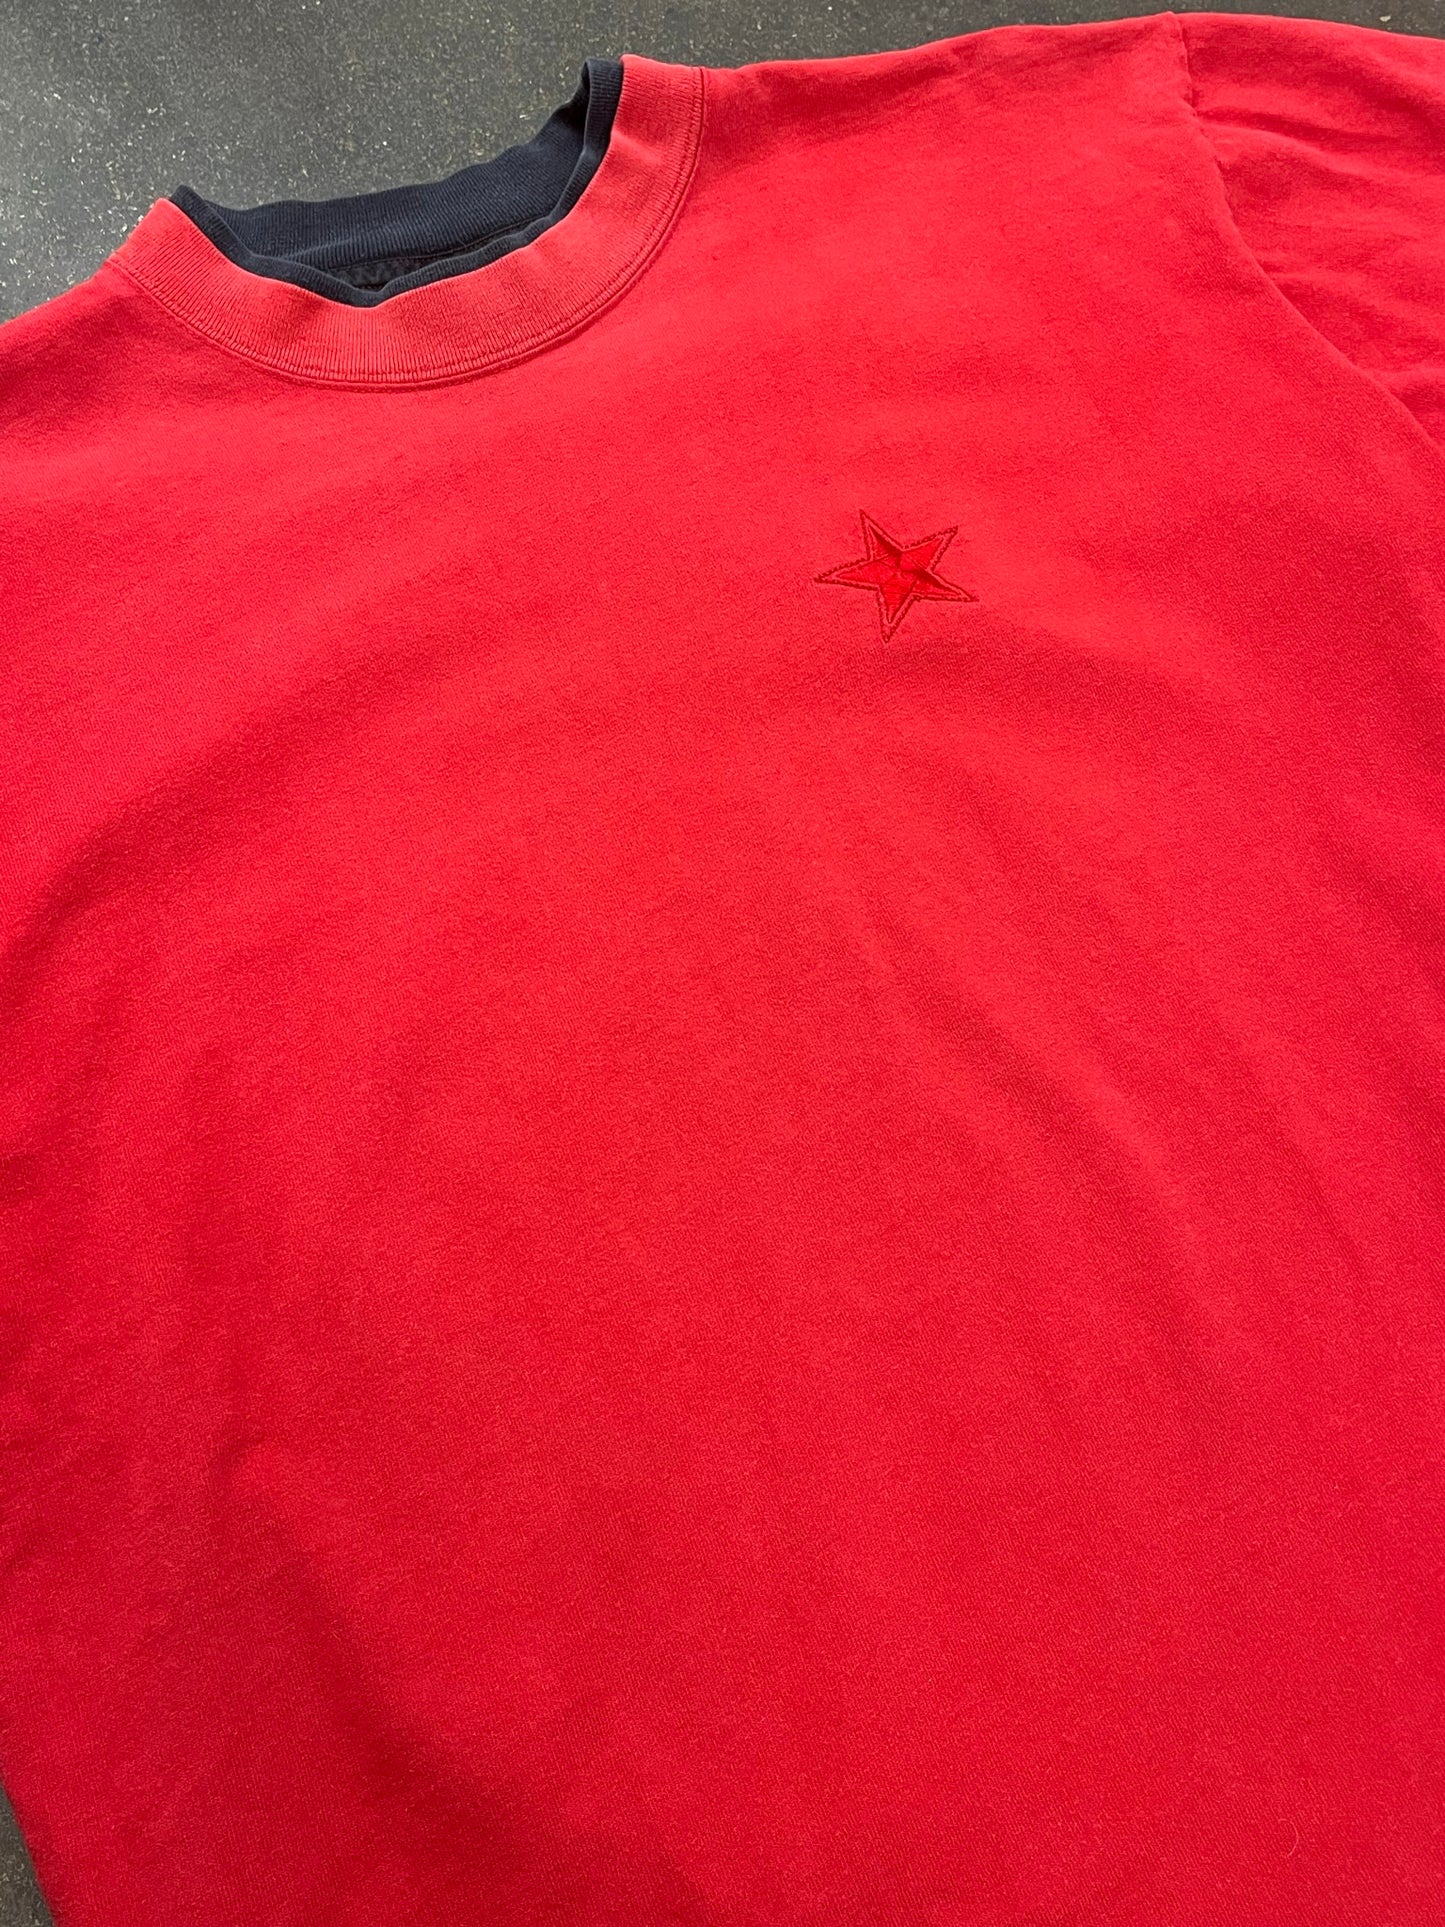 Vintage 90's Converse Star Red Tee Size L